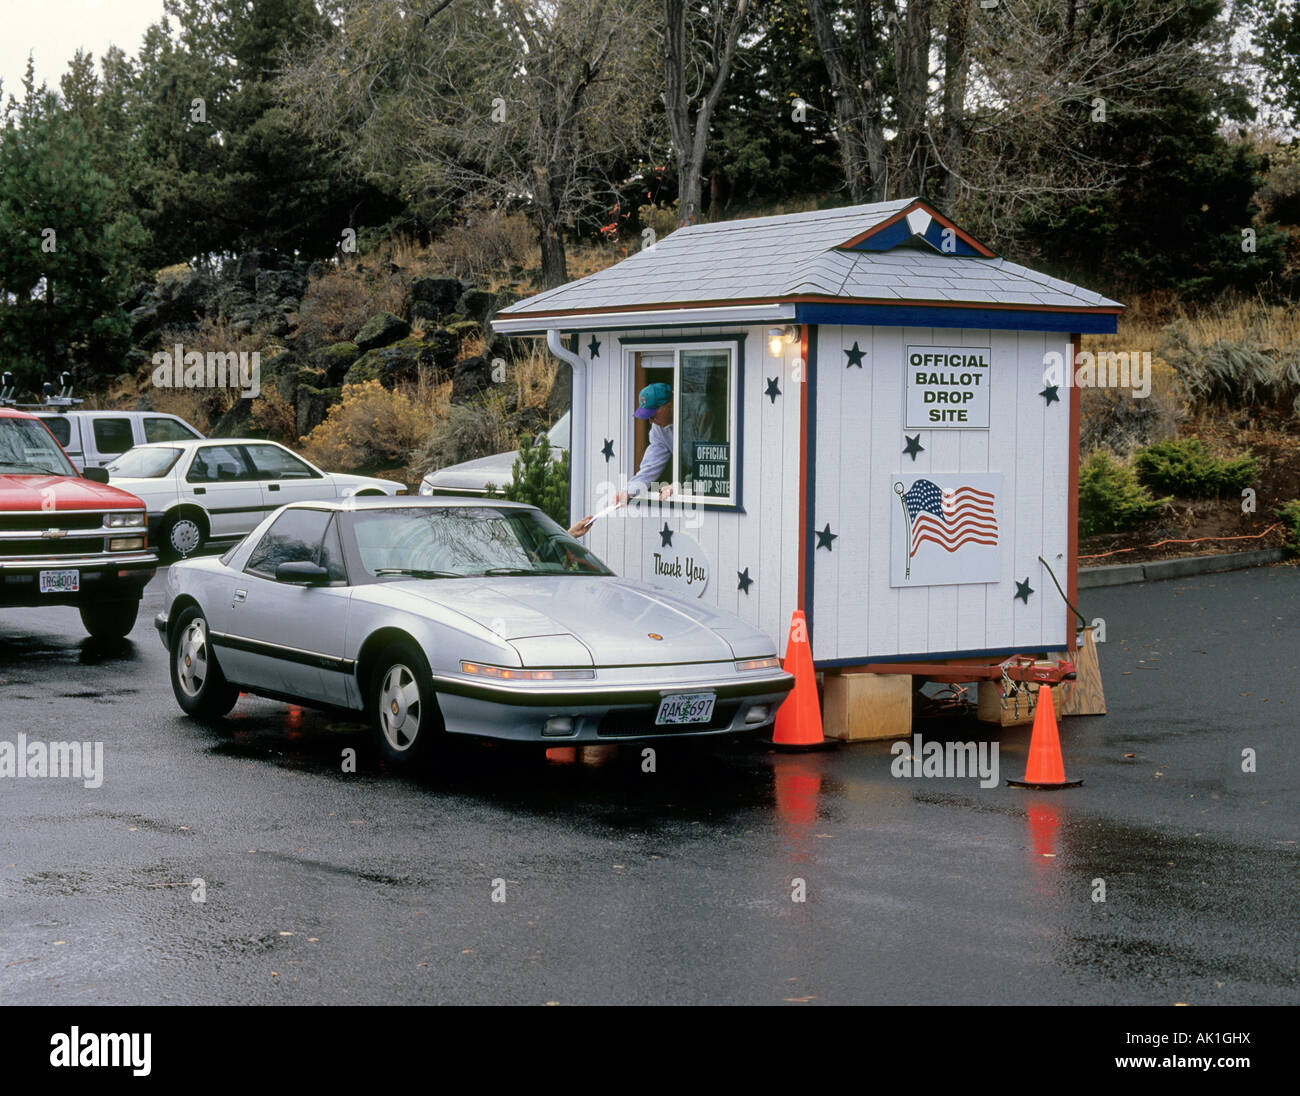 USA OREGON BEND A motorist drops off his mail in ballot at an official ballot drop site Stock Photo